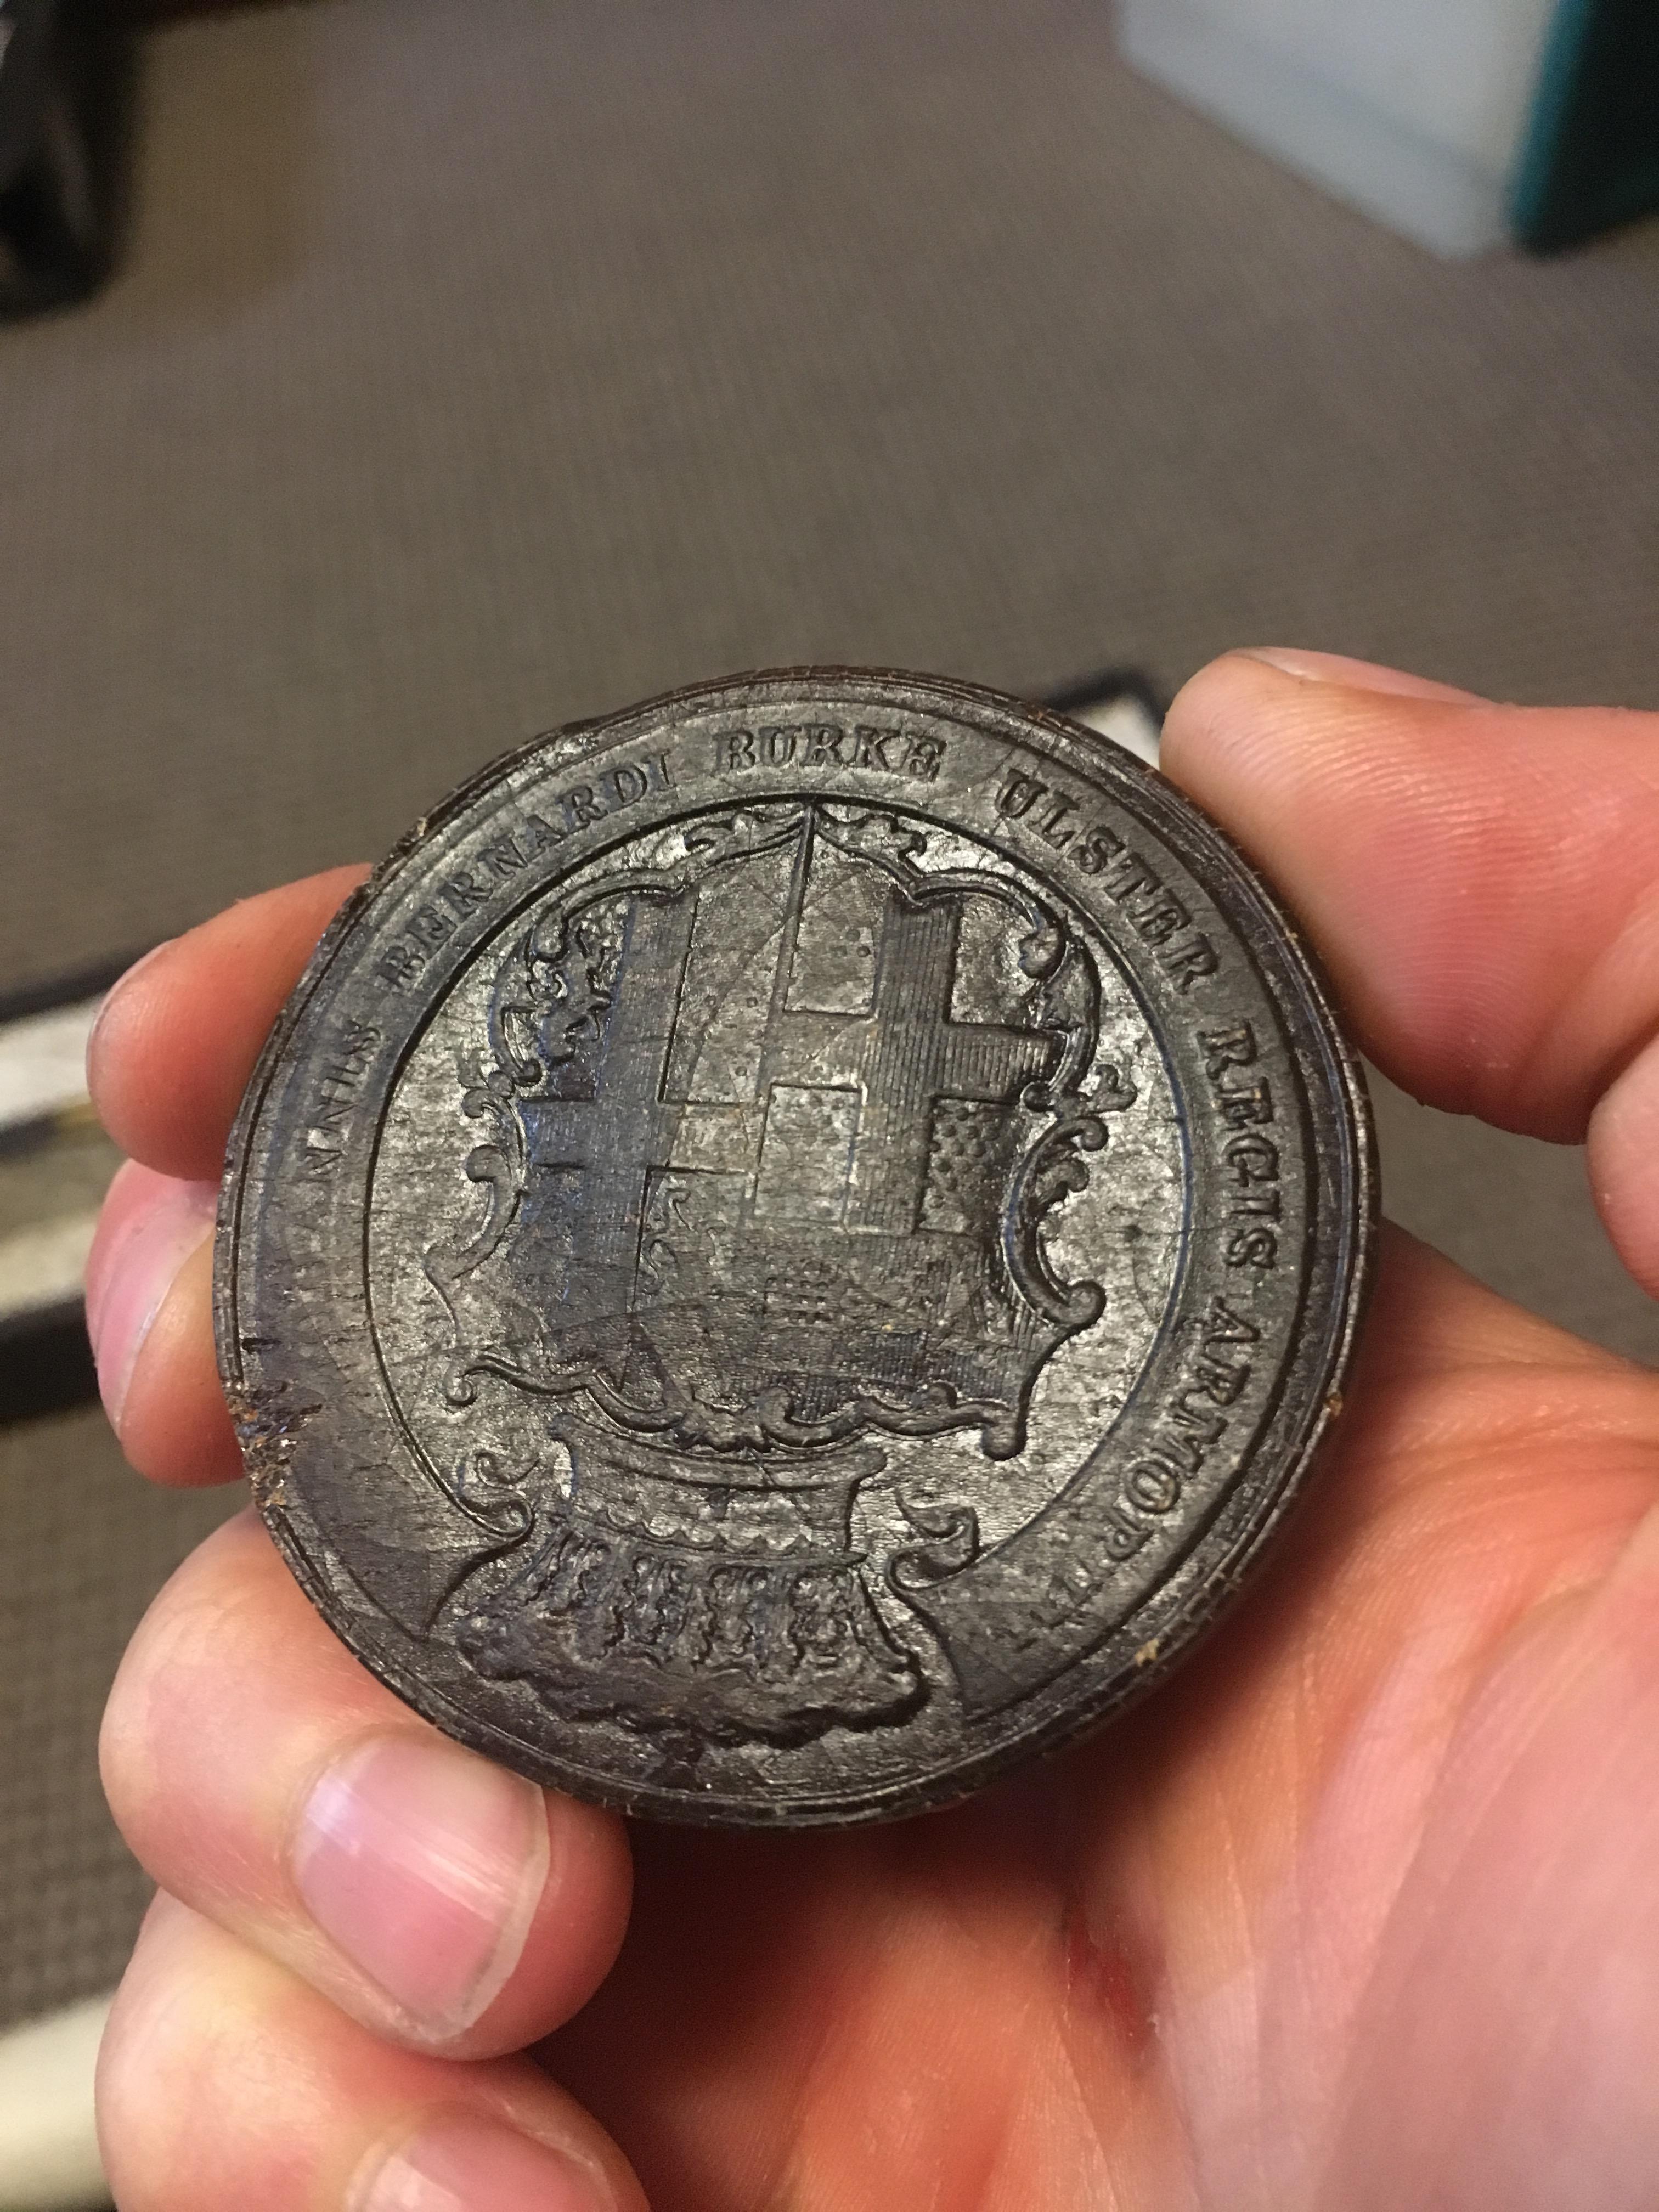 Close up on the seal, held in hand.